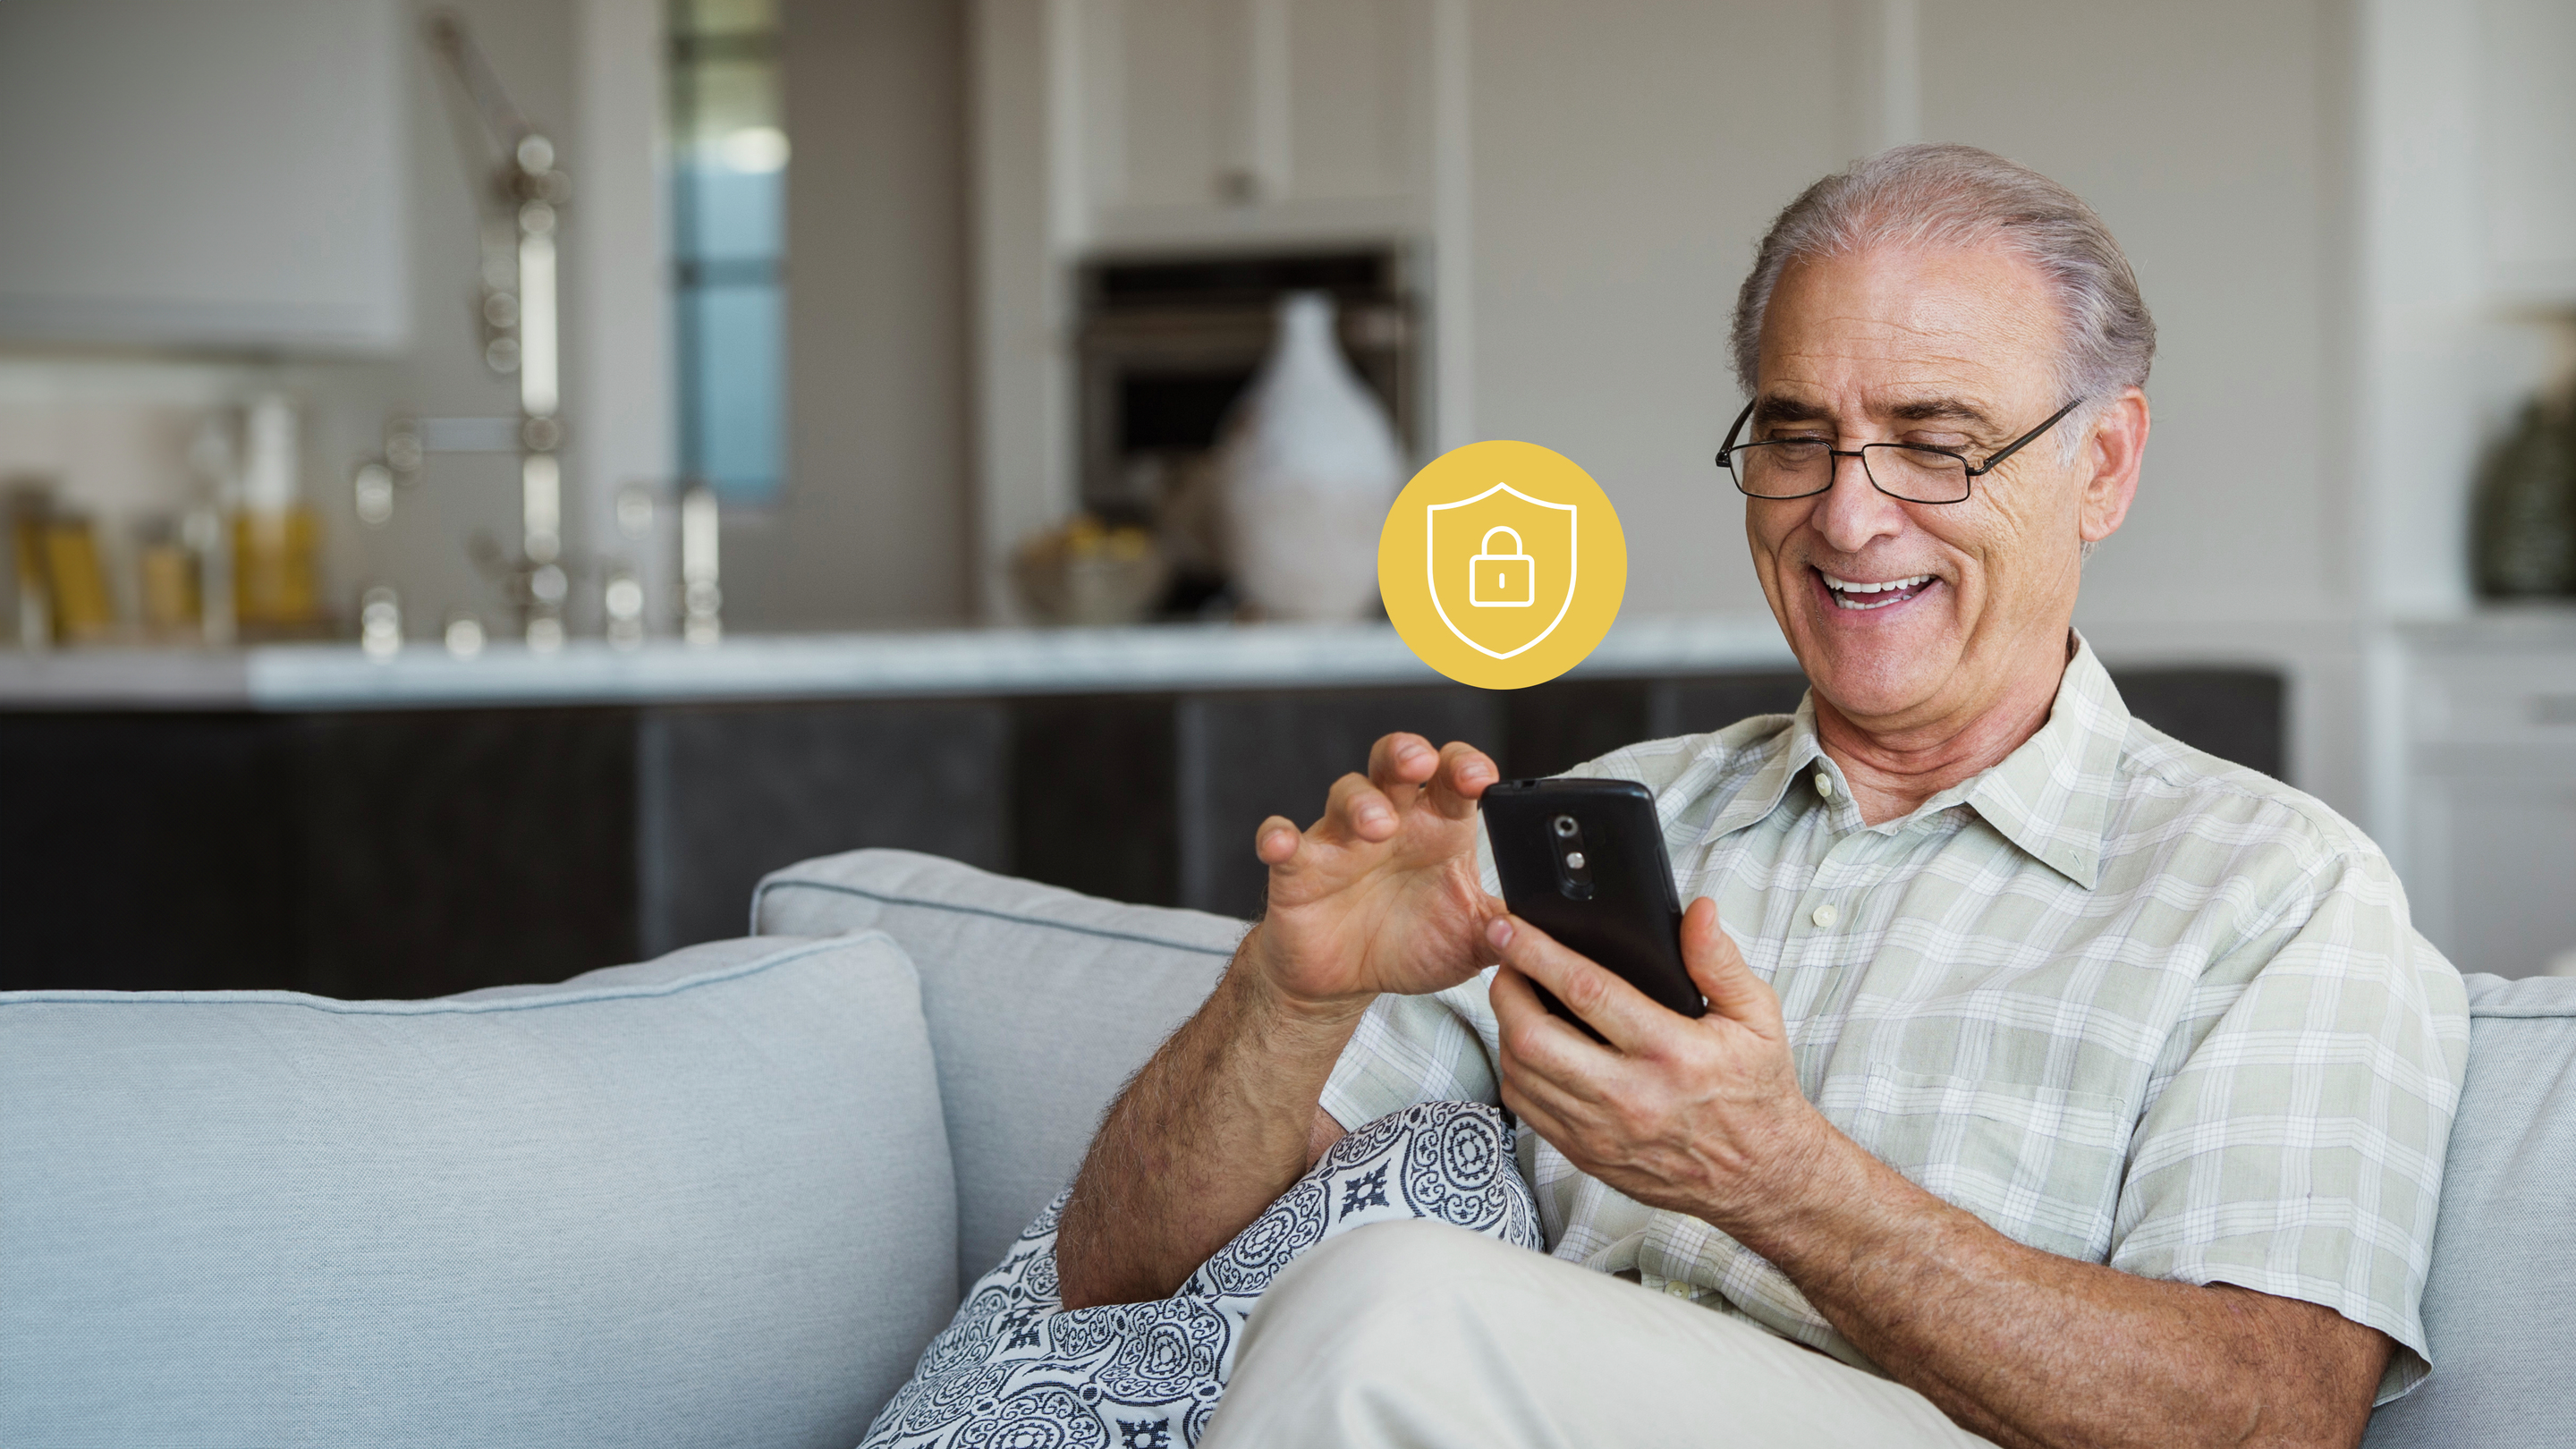 An older man smiling, viewing information on his smartphone. A security icon indicates his information is safe. 